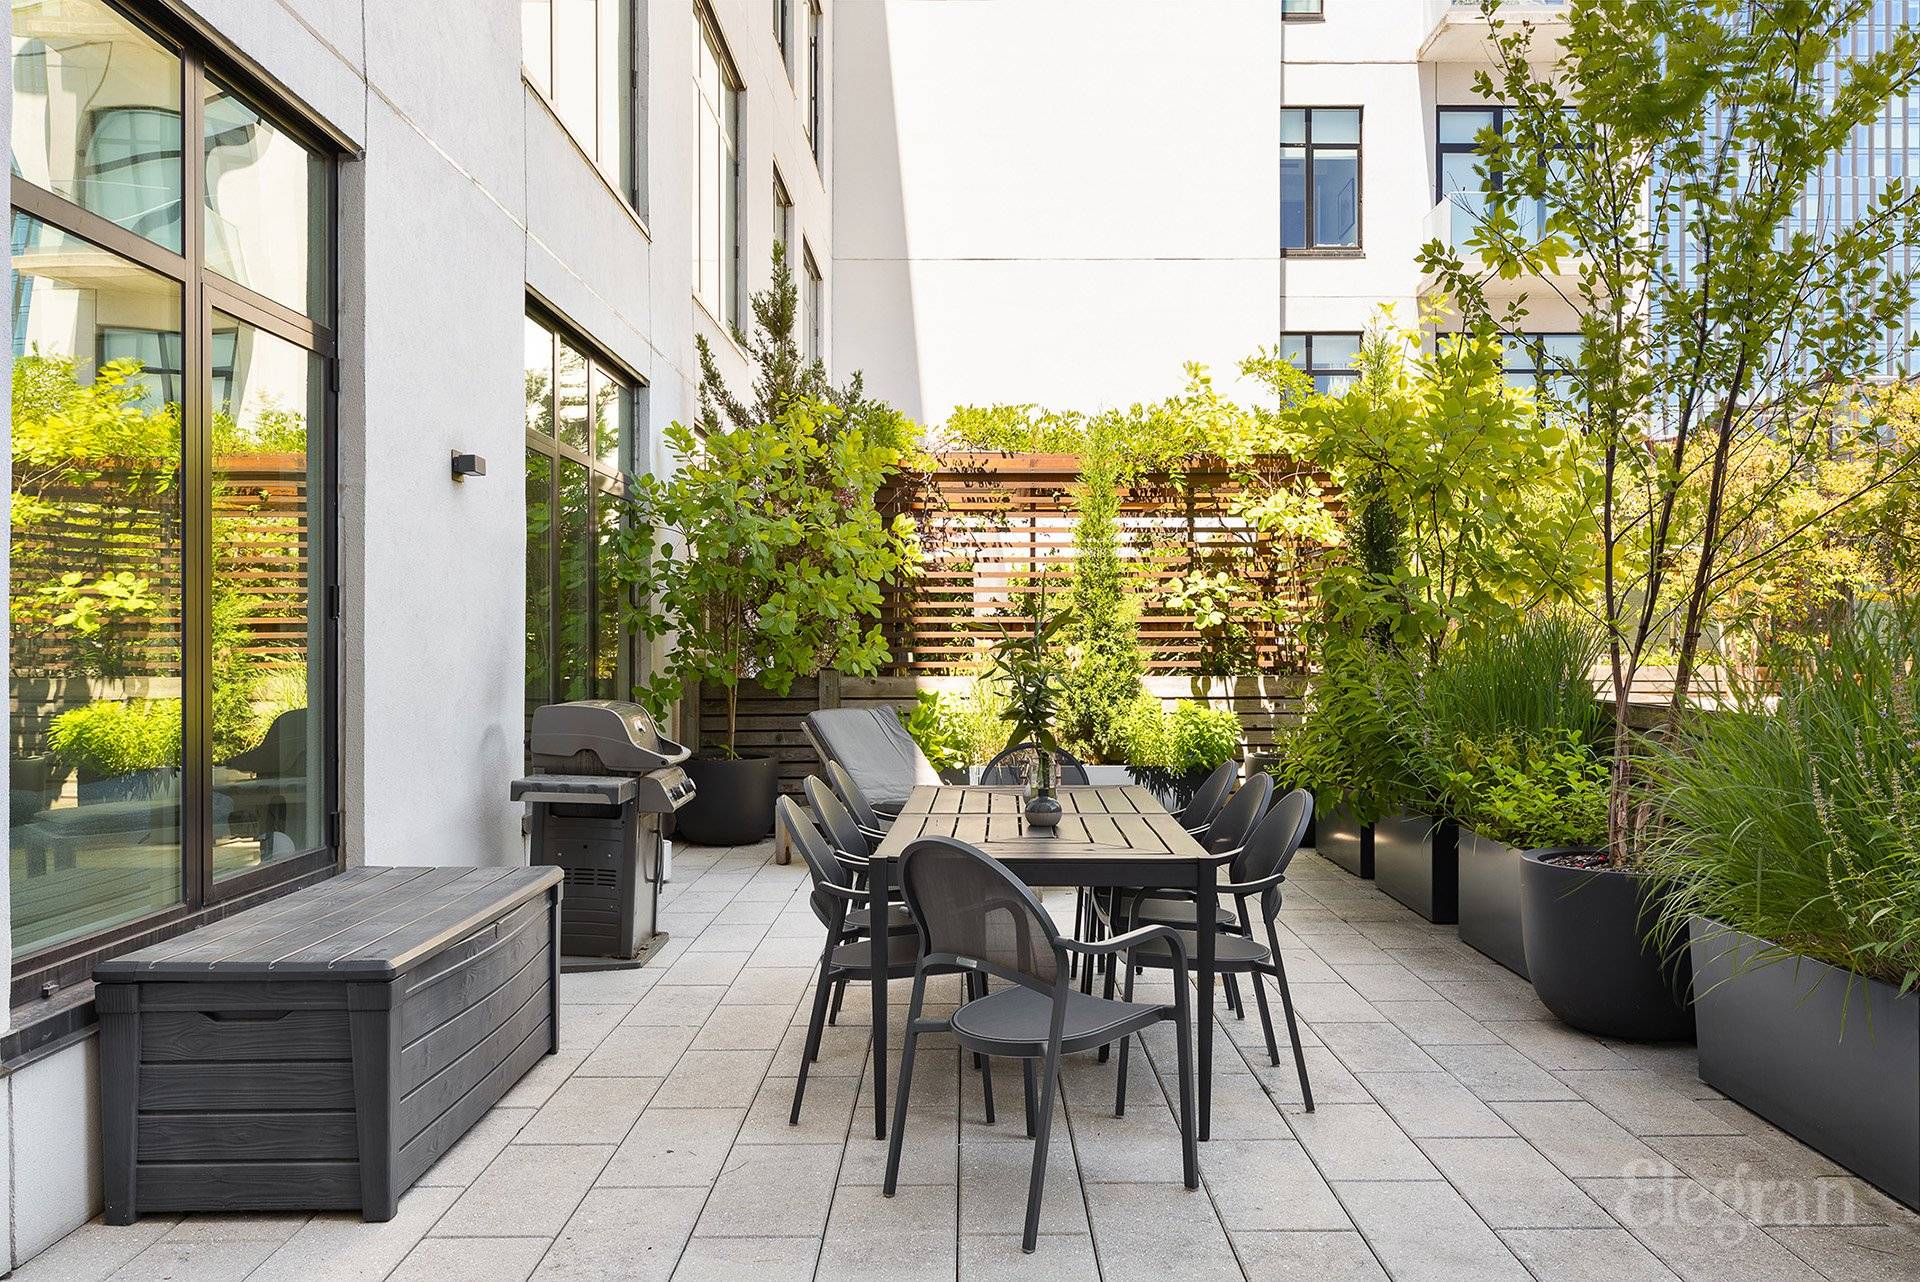 Outdoor Paradise ! Unit 3H at The Hendrik in Boerum Hill is a prime resale opportunity.